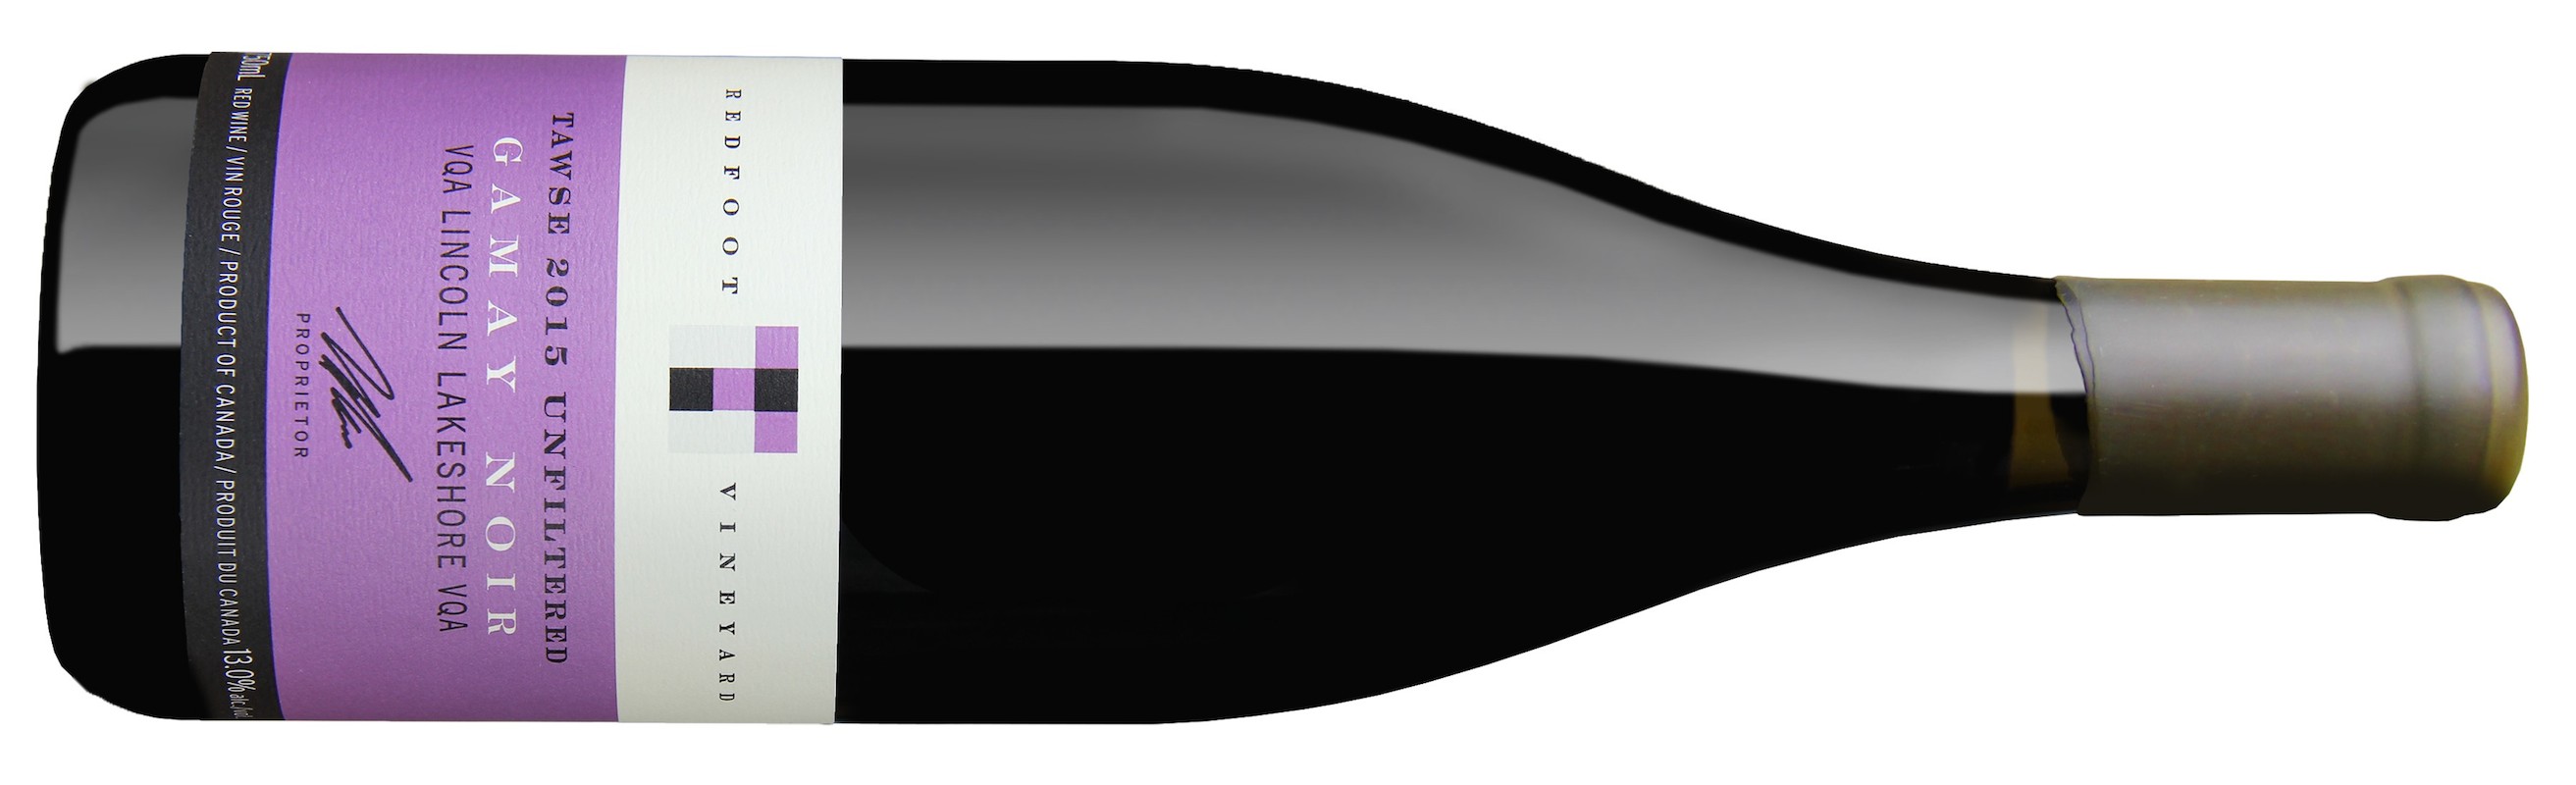 a2015 Unfiltered Gamay